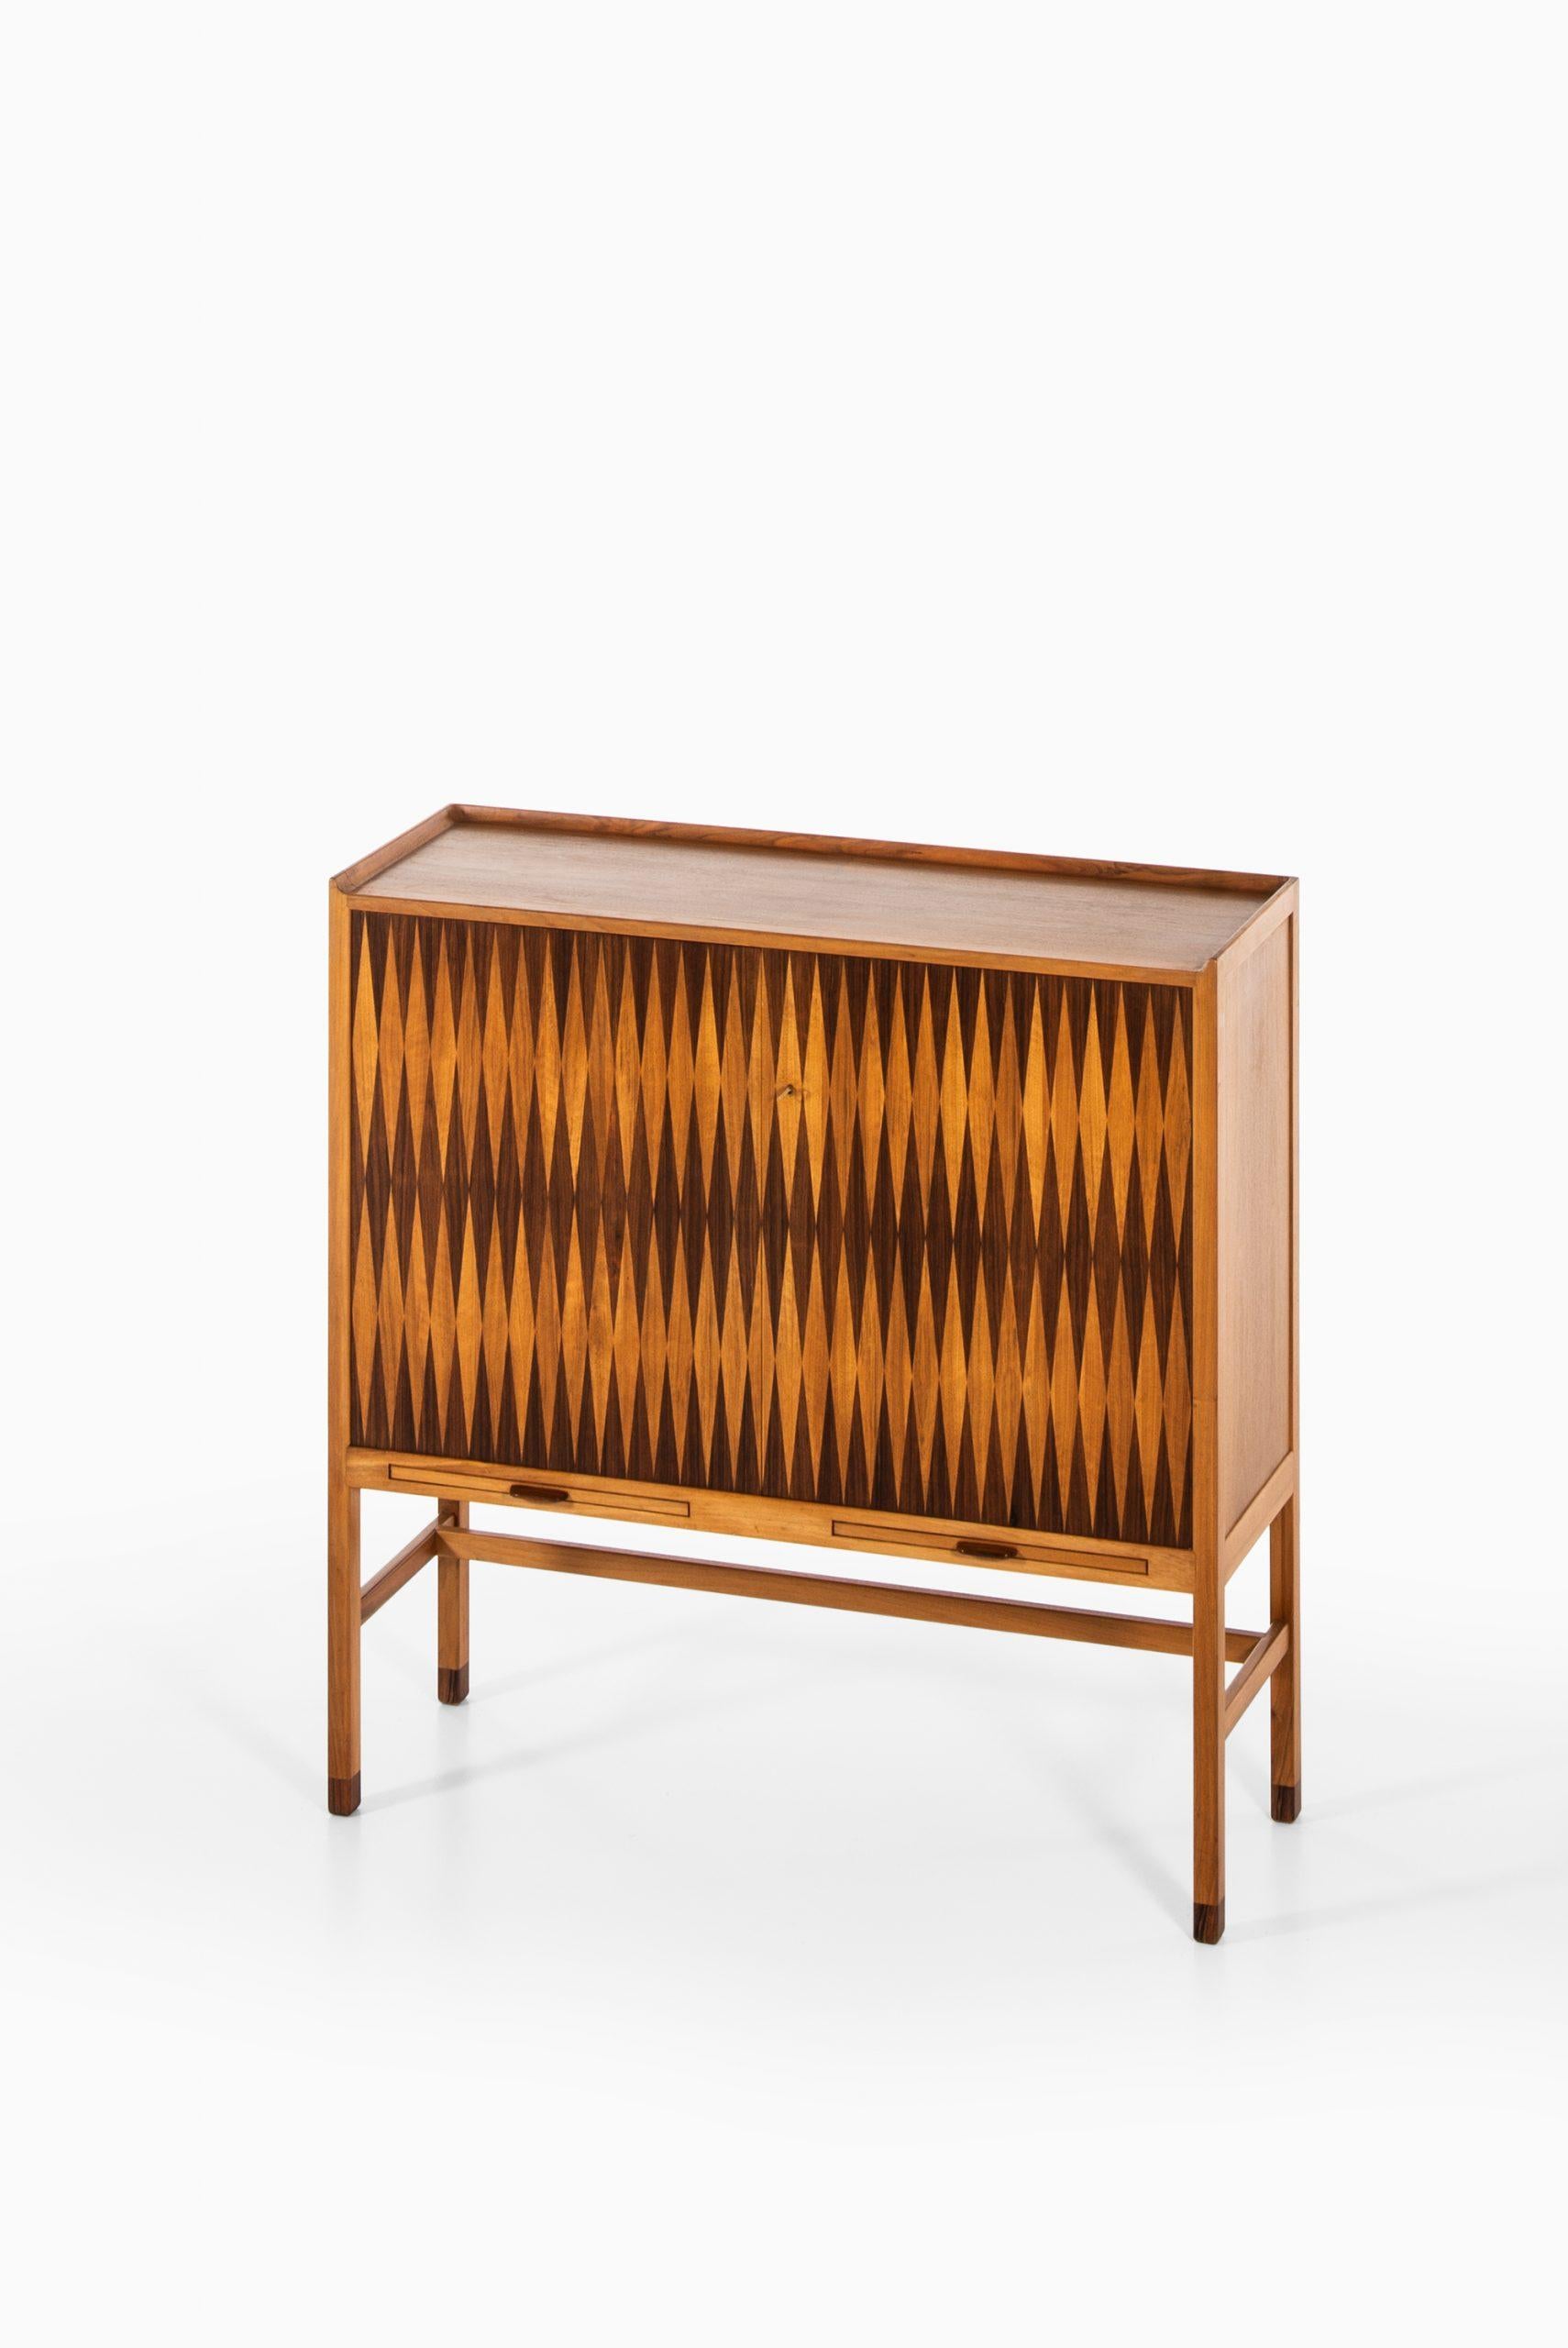 Mid-20th Century Cabinet Probably Produced in Denmark